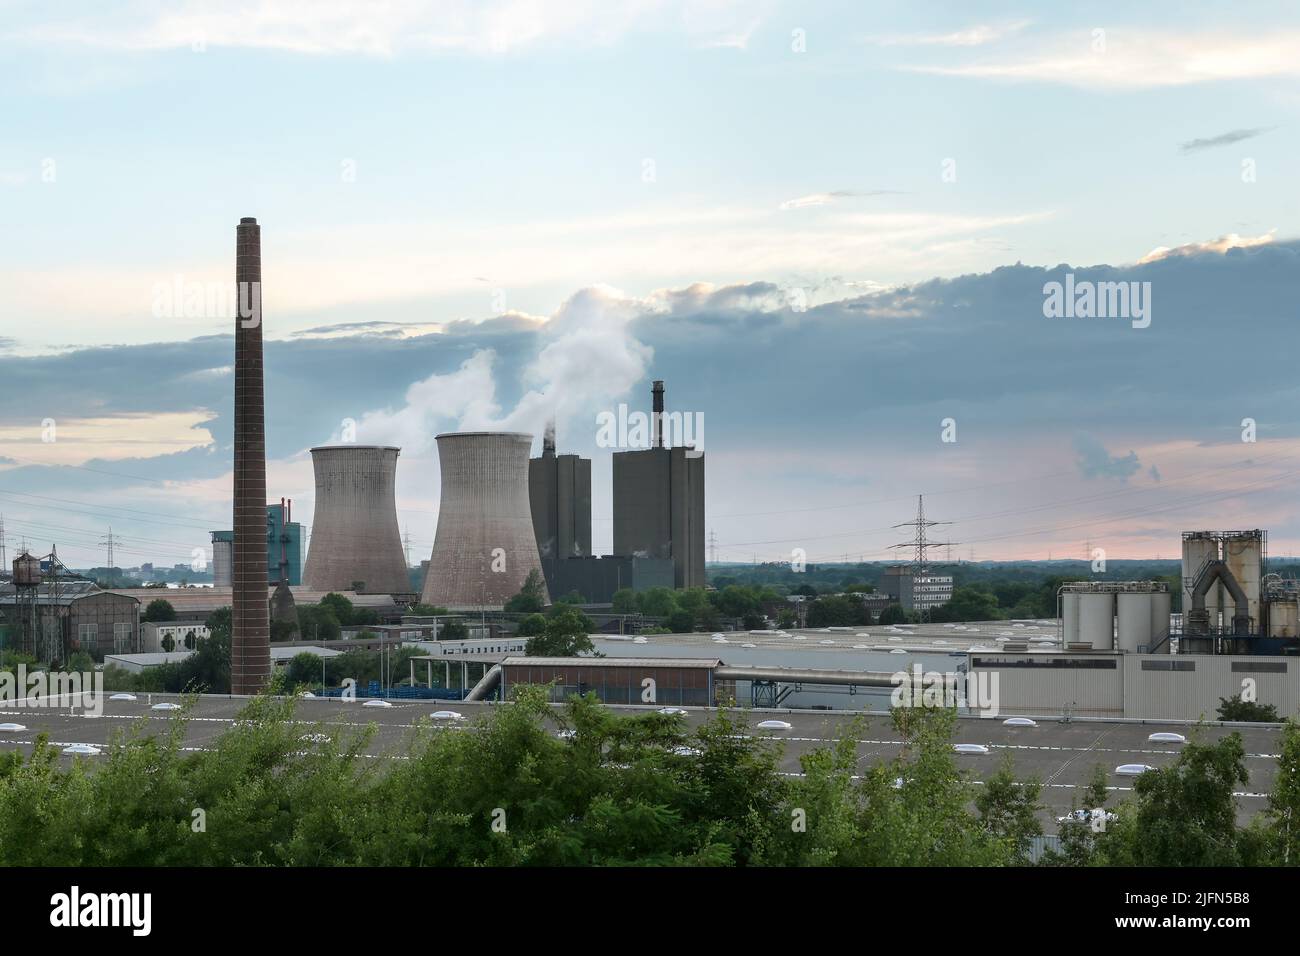 Chimney and cooling towers with pollution, steel production industry in Duisburg with blast furnaces, coke oven and power plant, industrial landscape Stock Photo